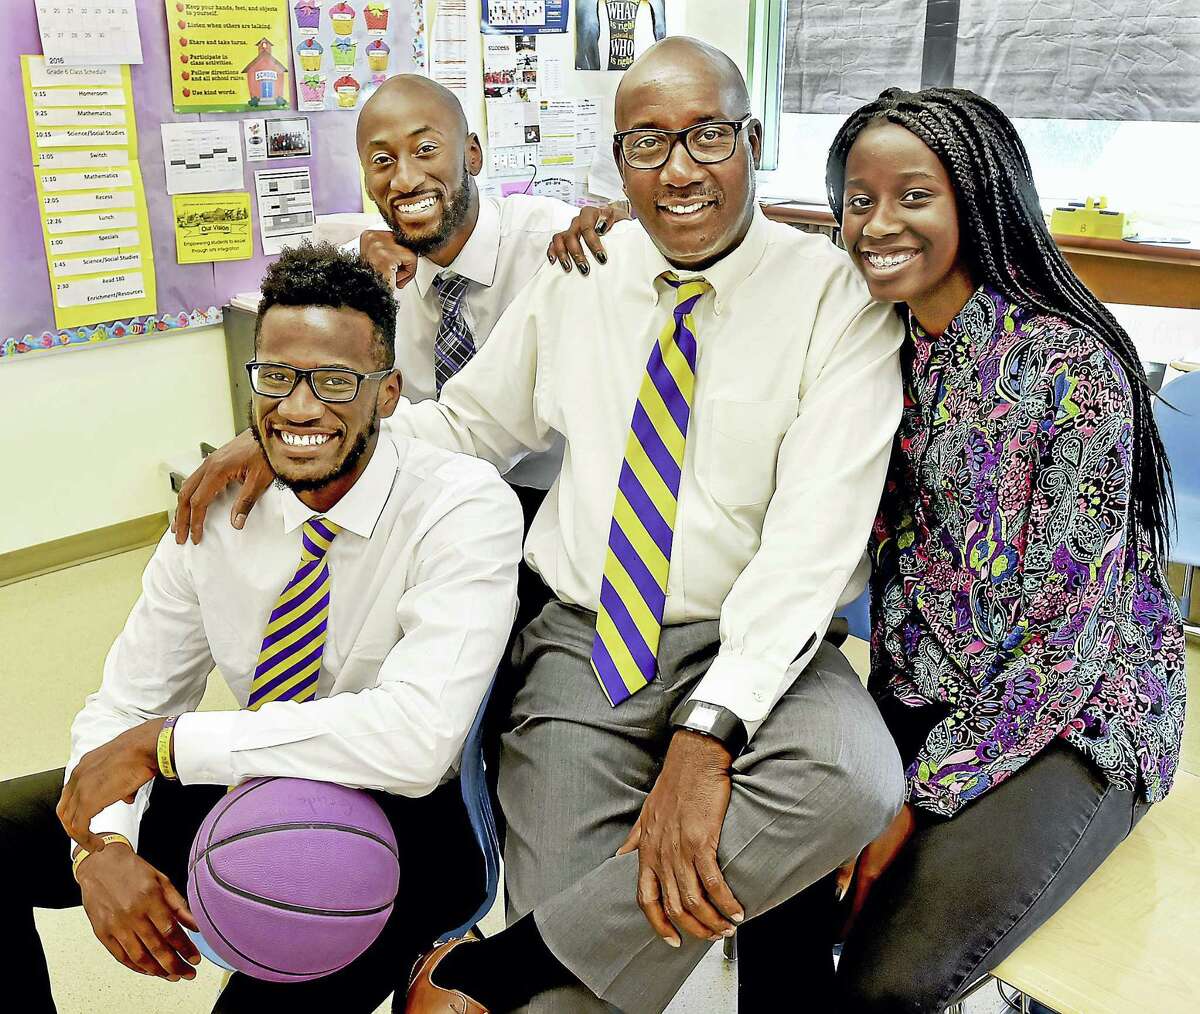 Larry Conaway, 62, the principal at New Light H.S and Riverside Educational Academy in New Haven with his son, Alexander, 23, a Trinsition Fellow and assistant basketball coach at Trinity College, Adham, 26, a teacher at the Davis St. School and Nyka, 15, a rising sophomore at Wilbur Cross, photographed in Adham’s classroom, Tuesday, June 14, 2016.